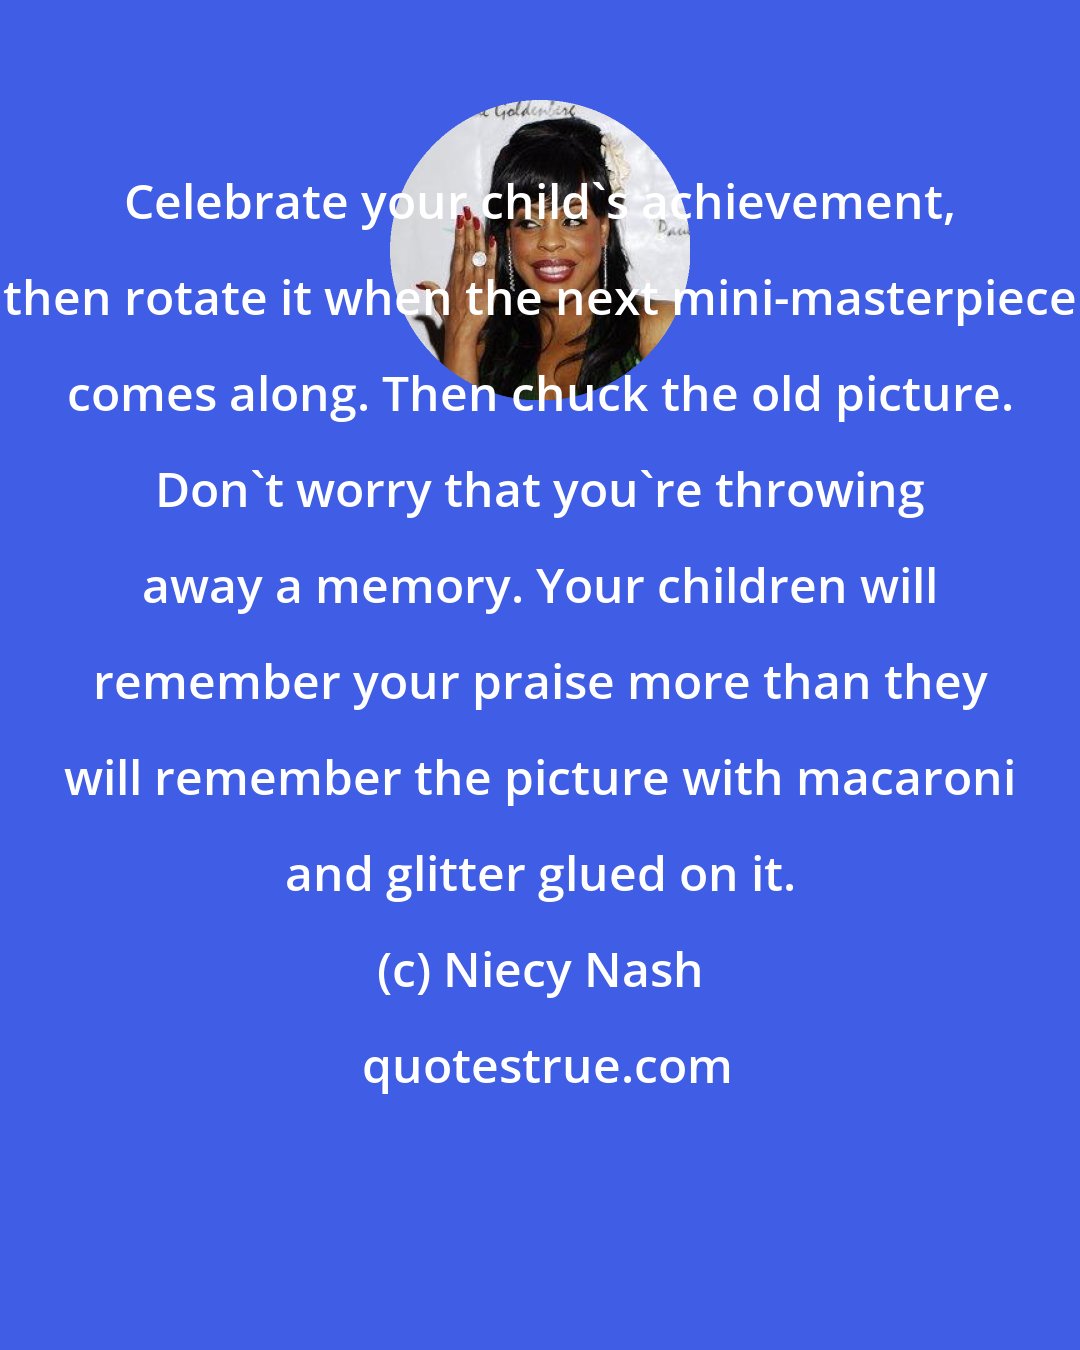 Niecy Nash: Celebrate your child's achievement, then rotate it when the next mini-masterpiece comes along. Then chuck the old picture. Don't worry that you're throwing away a memory. Your children will remember your praise more than they will remember the picture with macaroni and glitter glued on it.